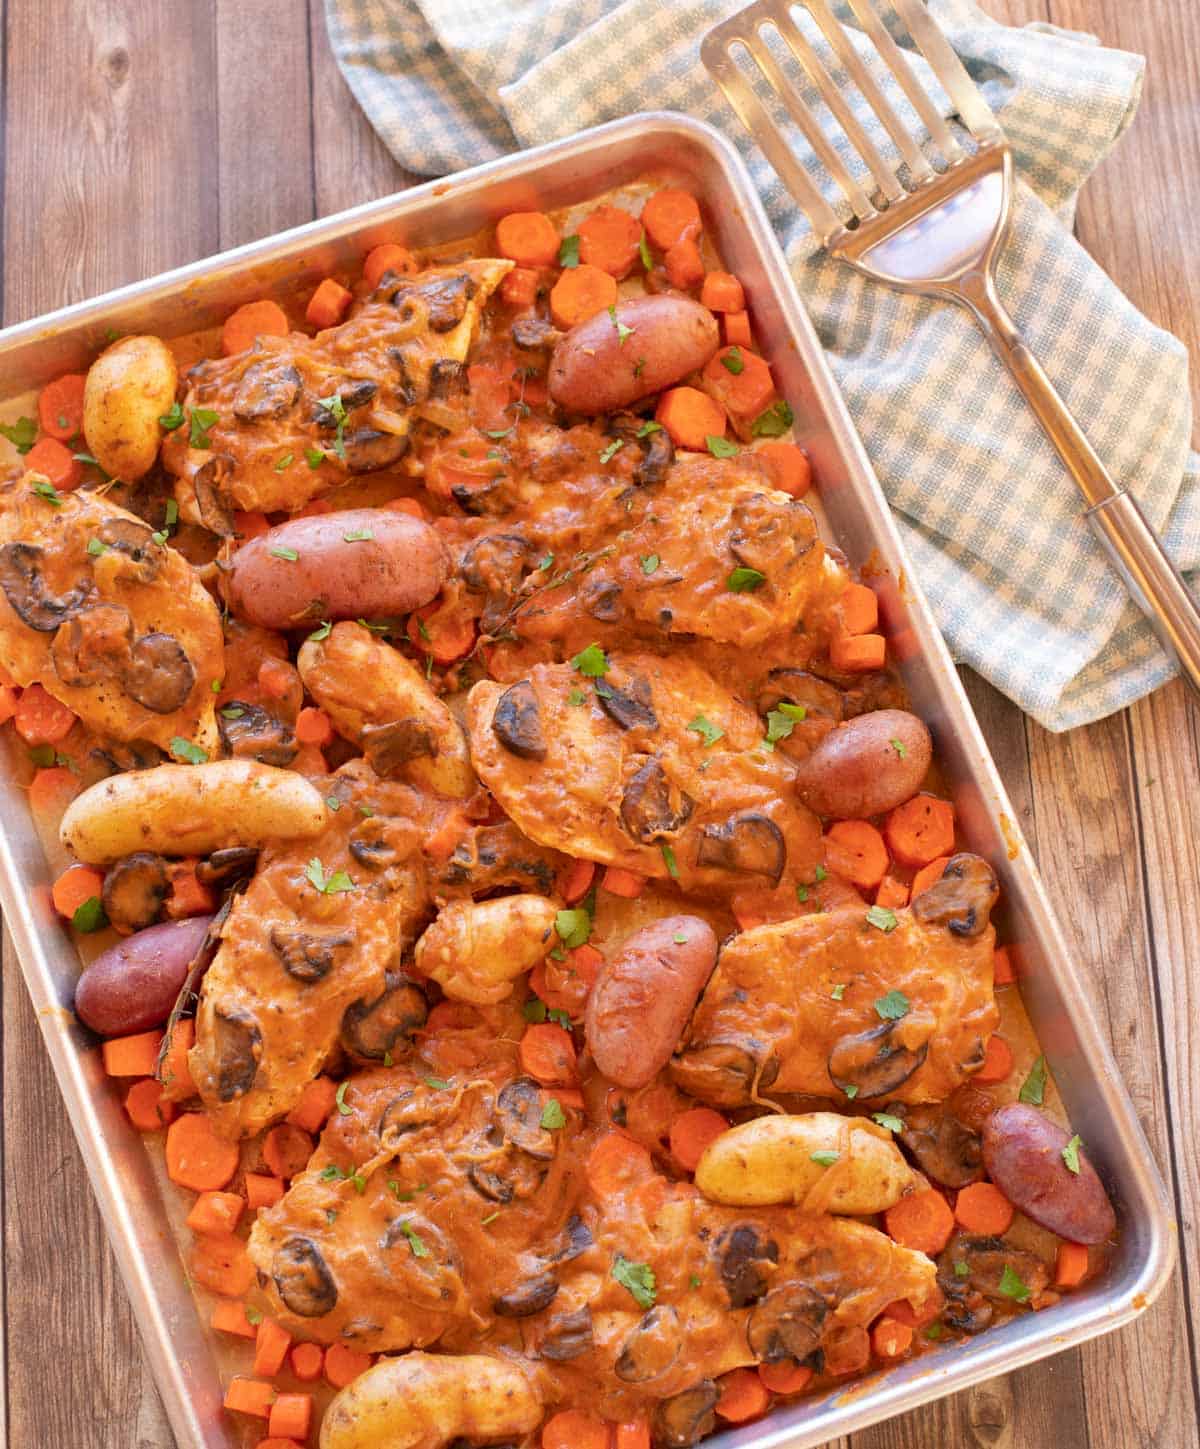 Sheet pan with chicken, carrots, potatoes and mushroom sauce